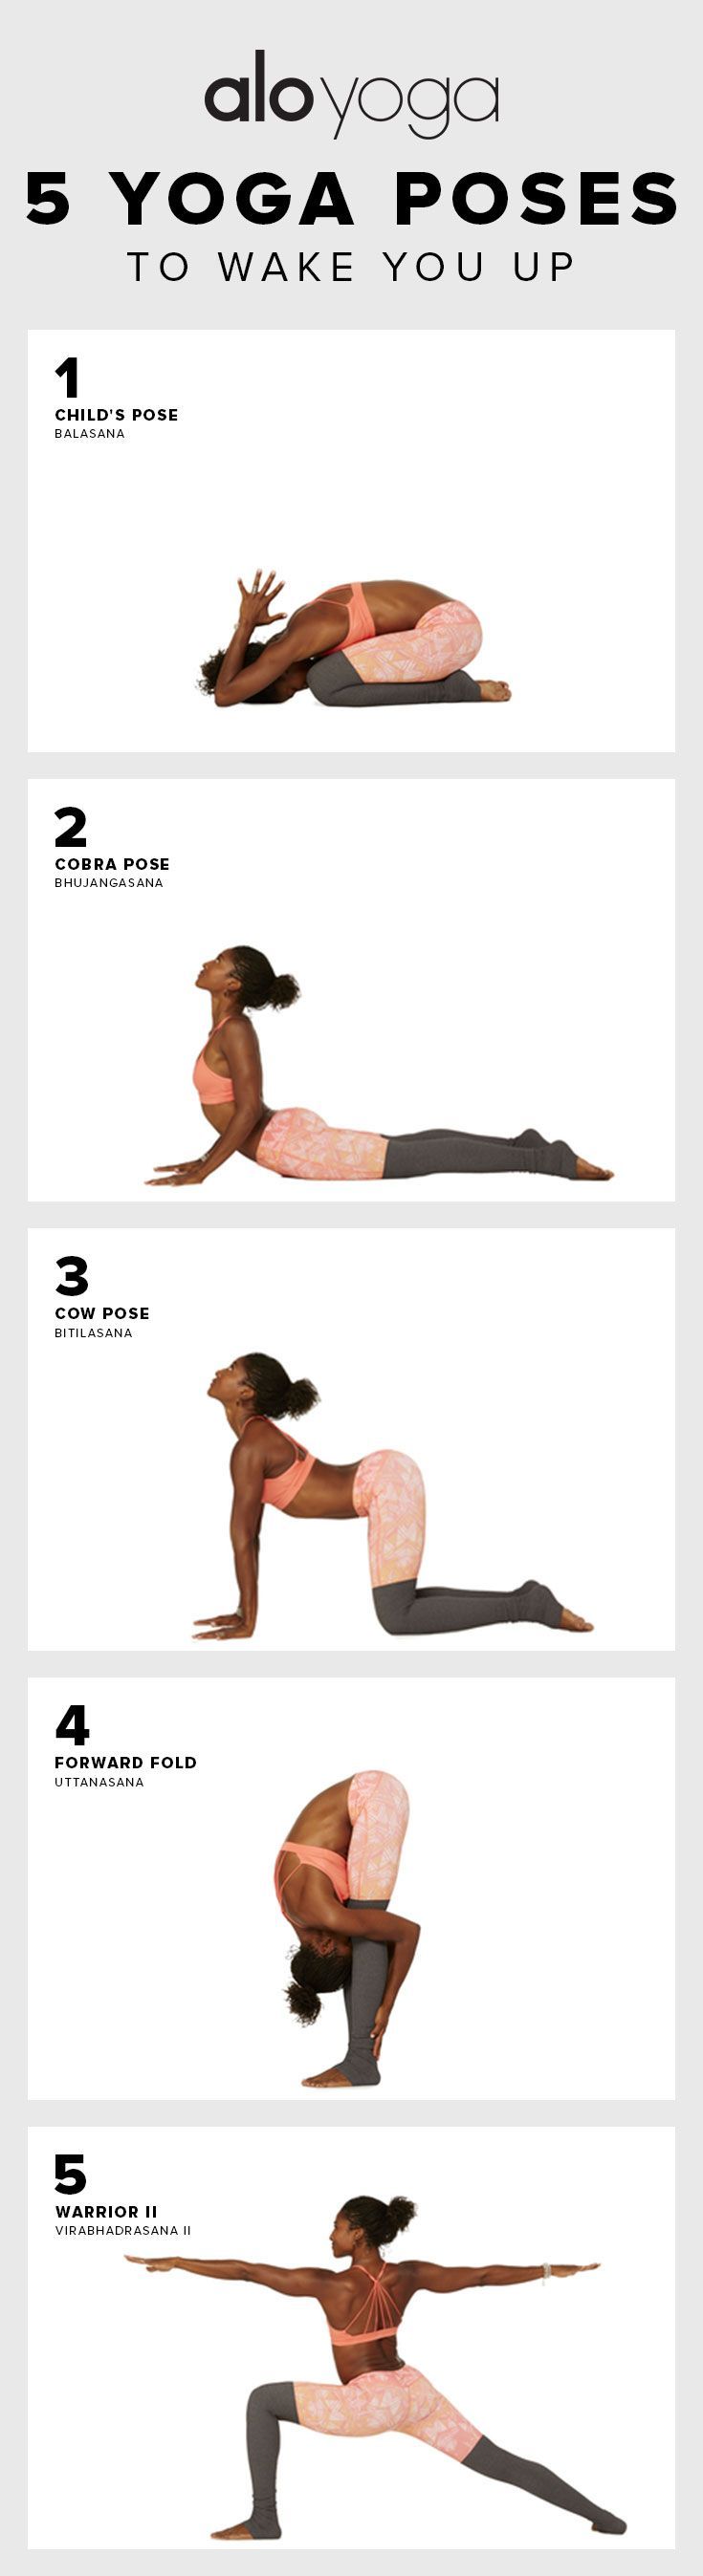 5 Yoga Poses To Wake You Up in the Morning! #betterthancoffee #yoga #stretch…